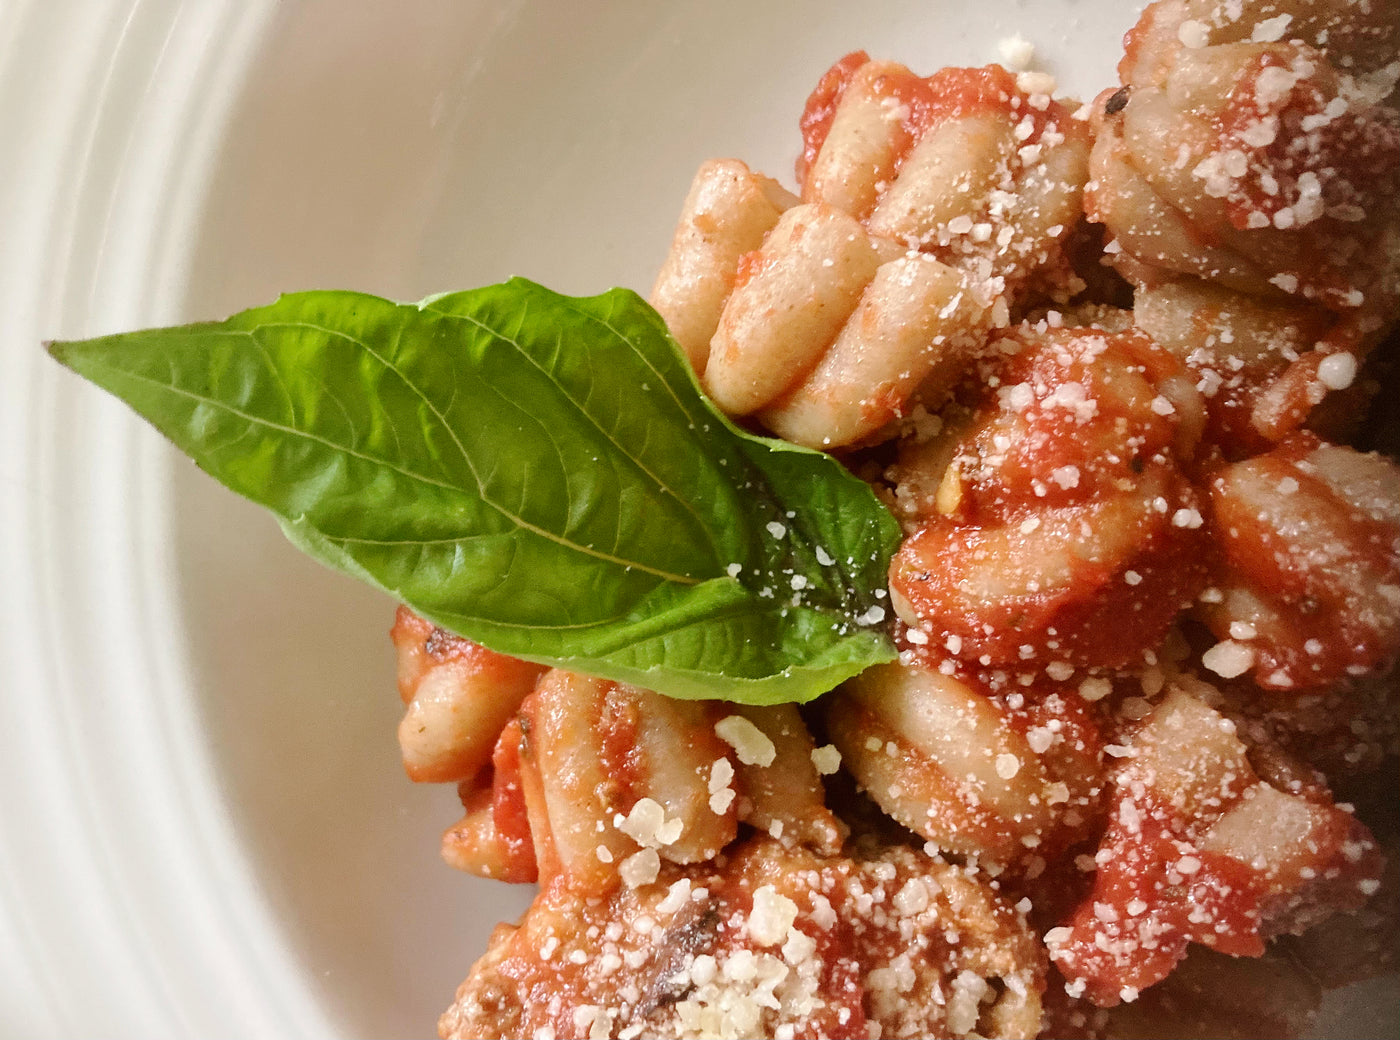 Closeup photo of Foggy Mountain Pasta with a red sauce and a large basil leaf